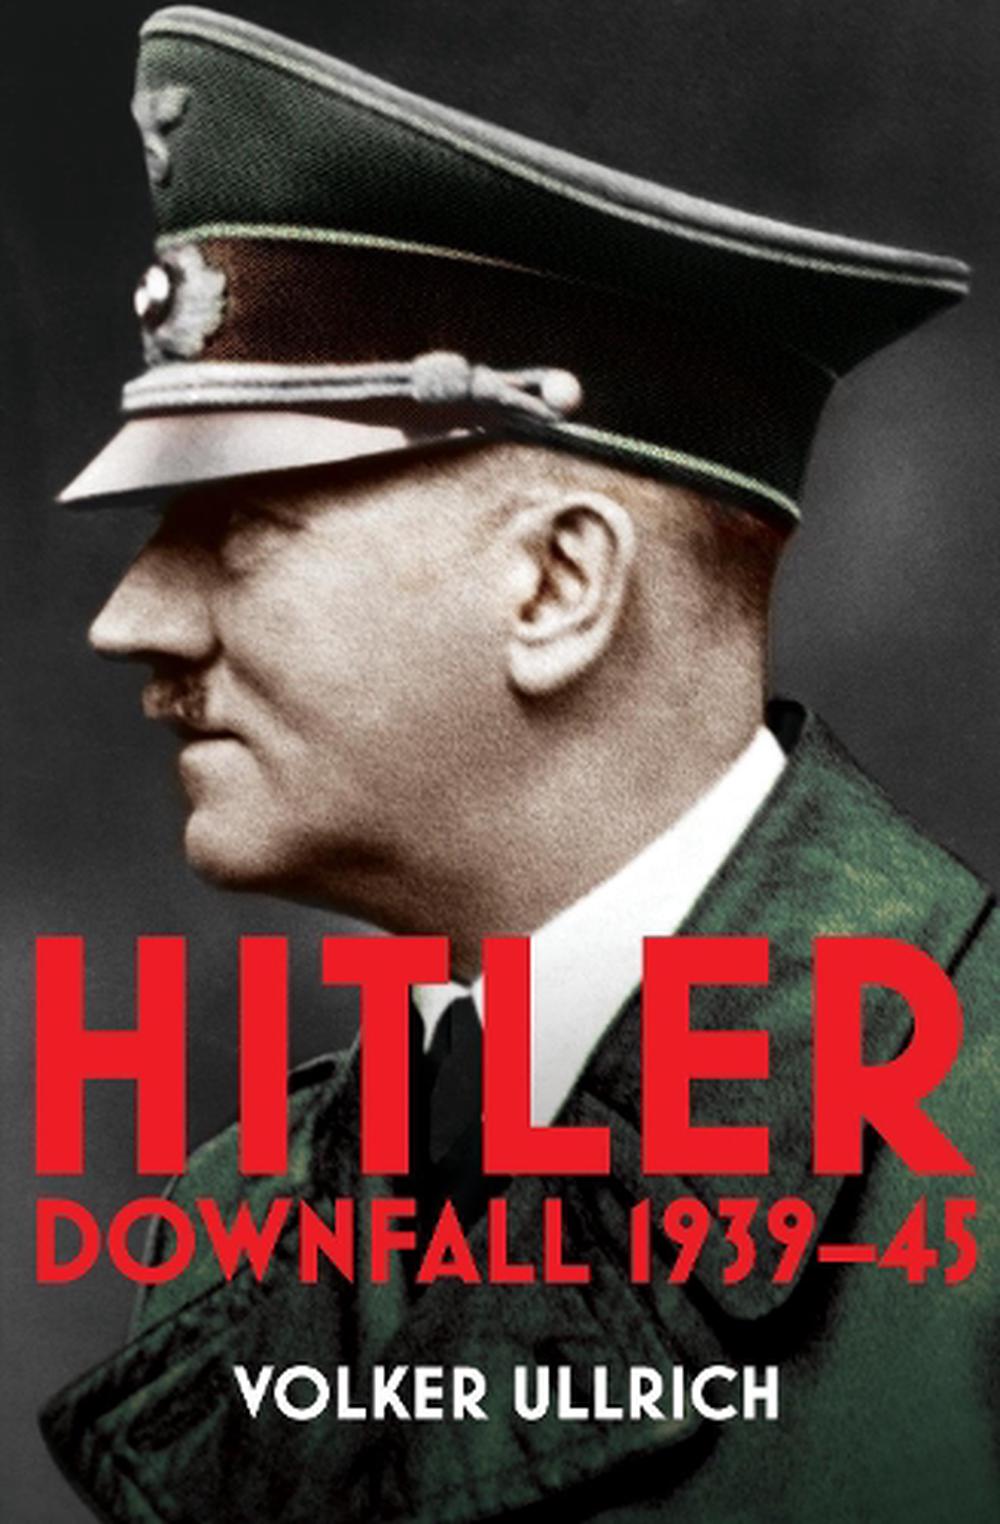 Hitler: Volume Ii: Downfall 1939-45 by Volker Ullrich (English) Free ...